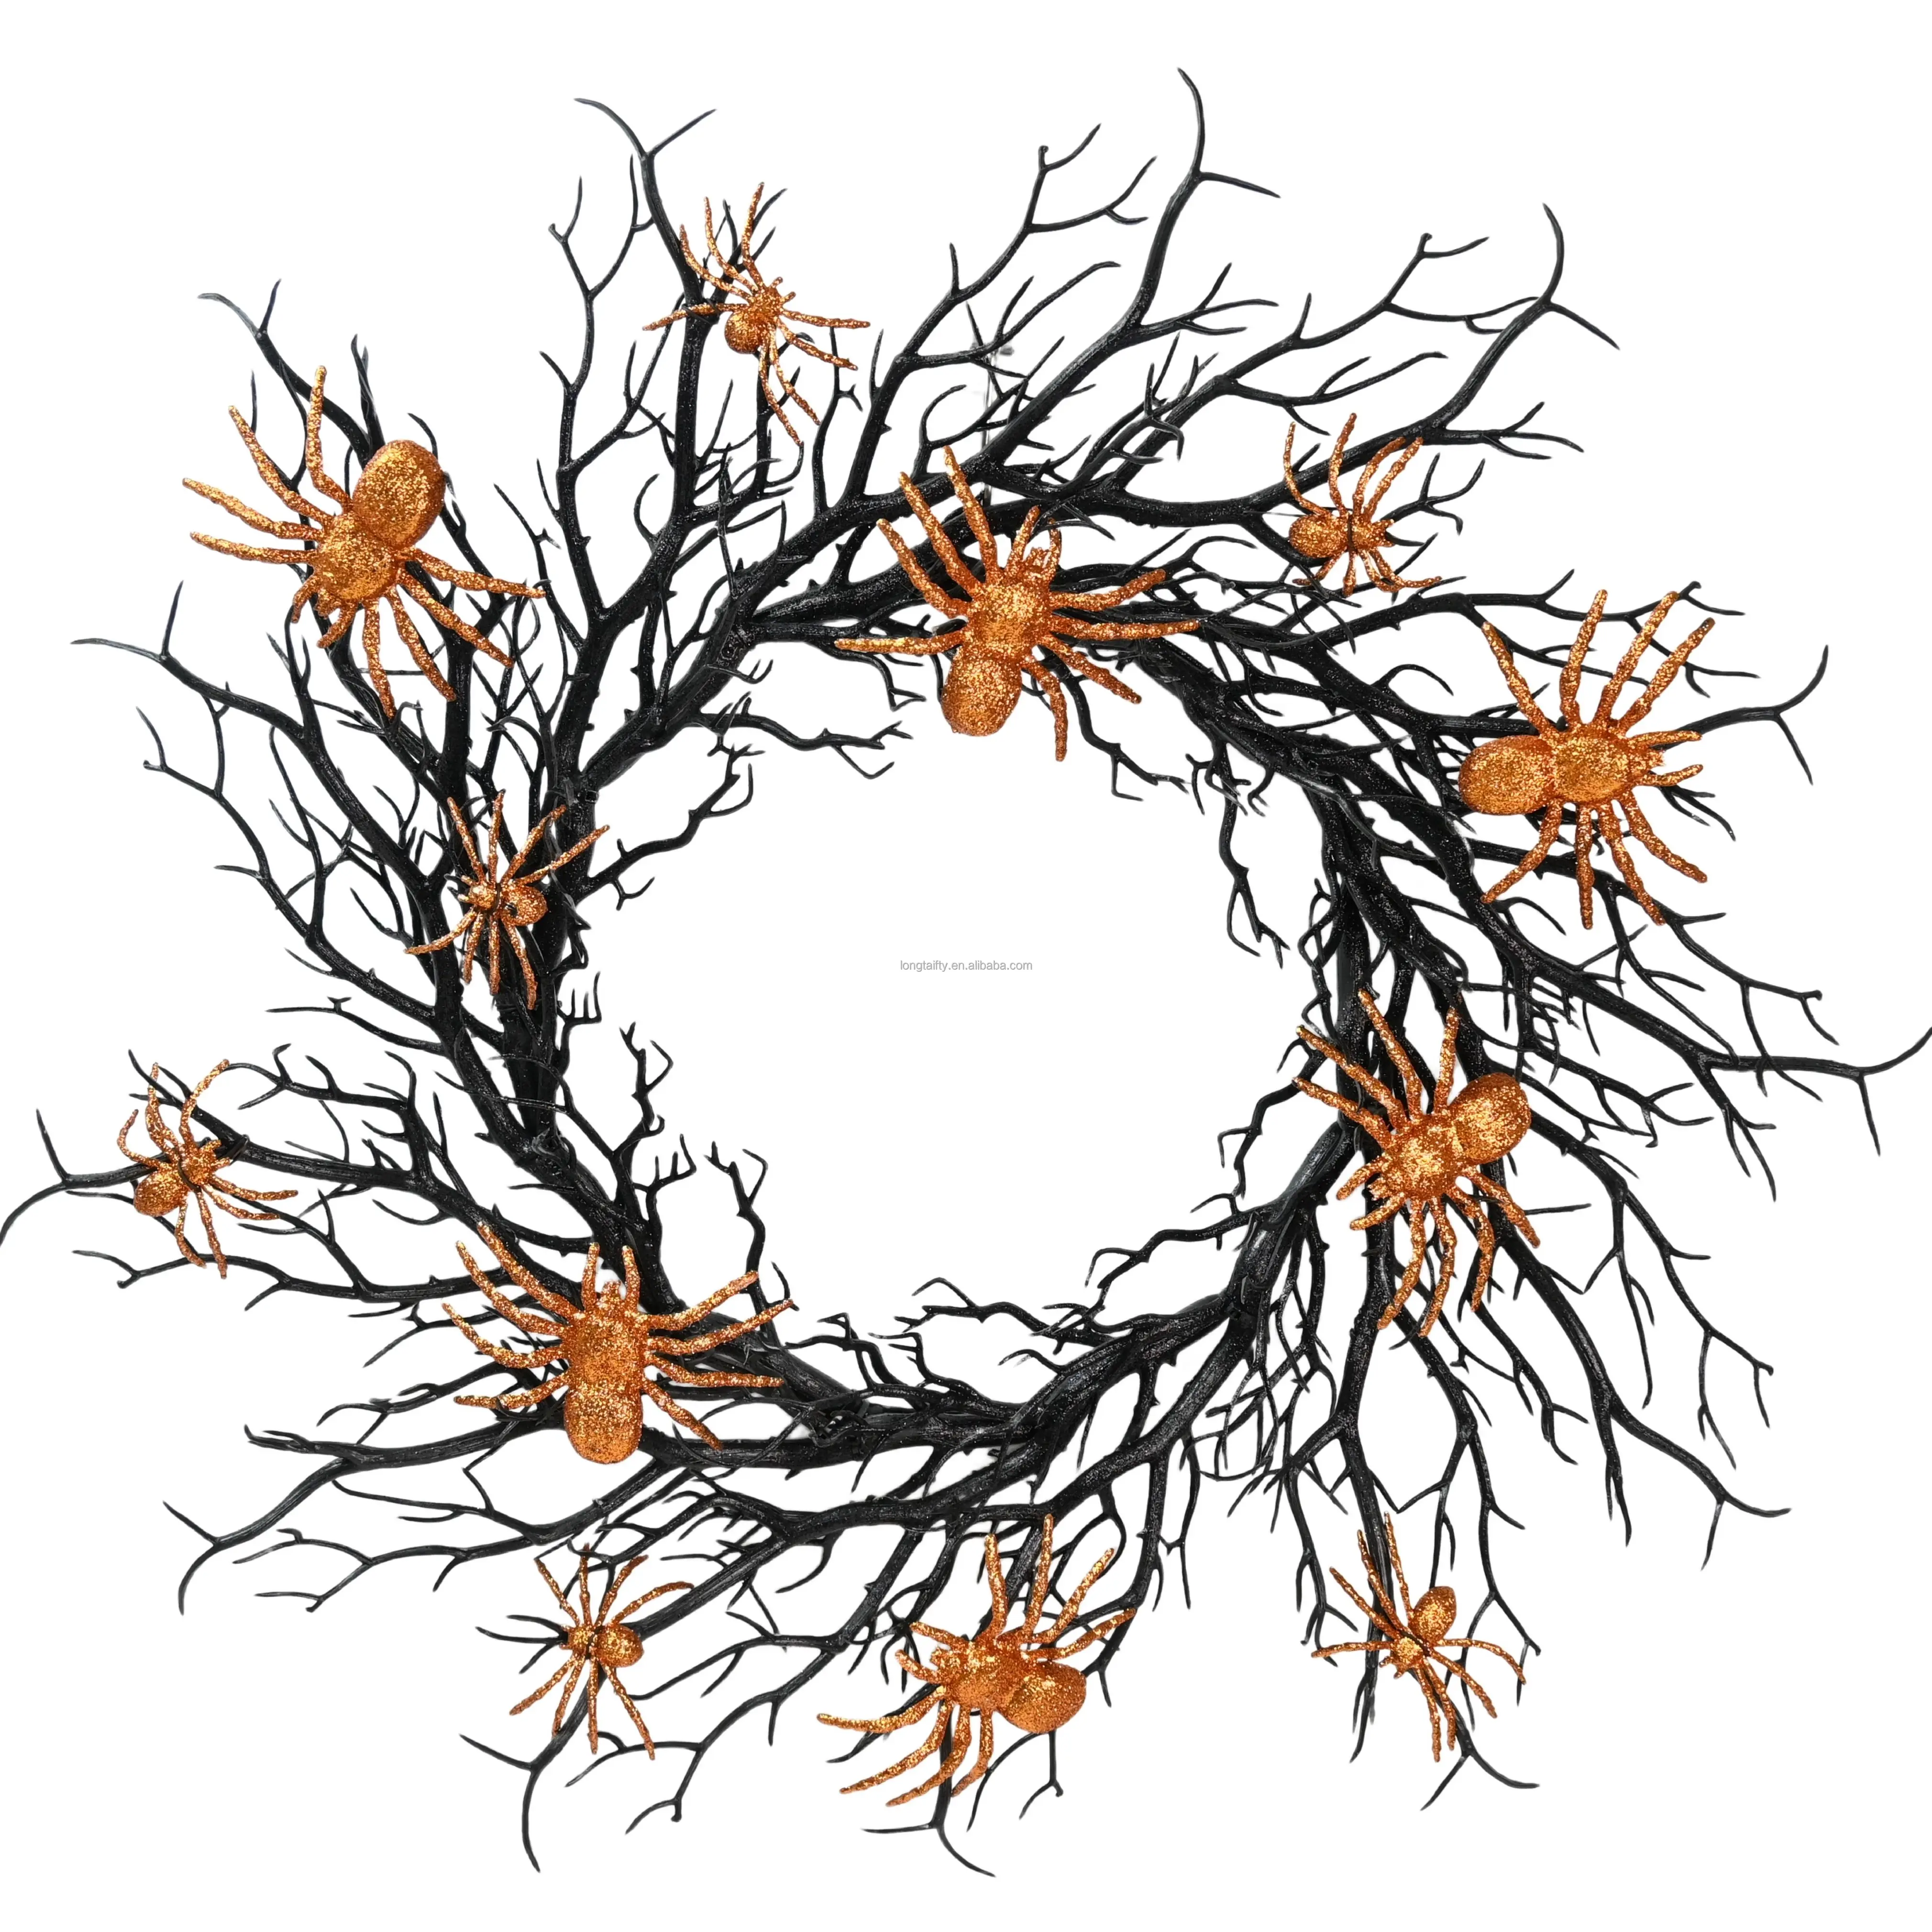 Commercial Halloween Black Glitter Twigs Artificial Dry Tree Branches Horror Spiders Wreaths Decorations